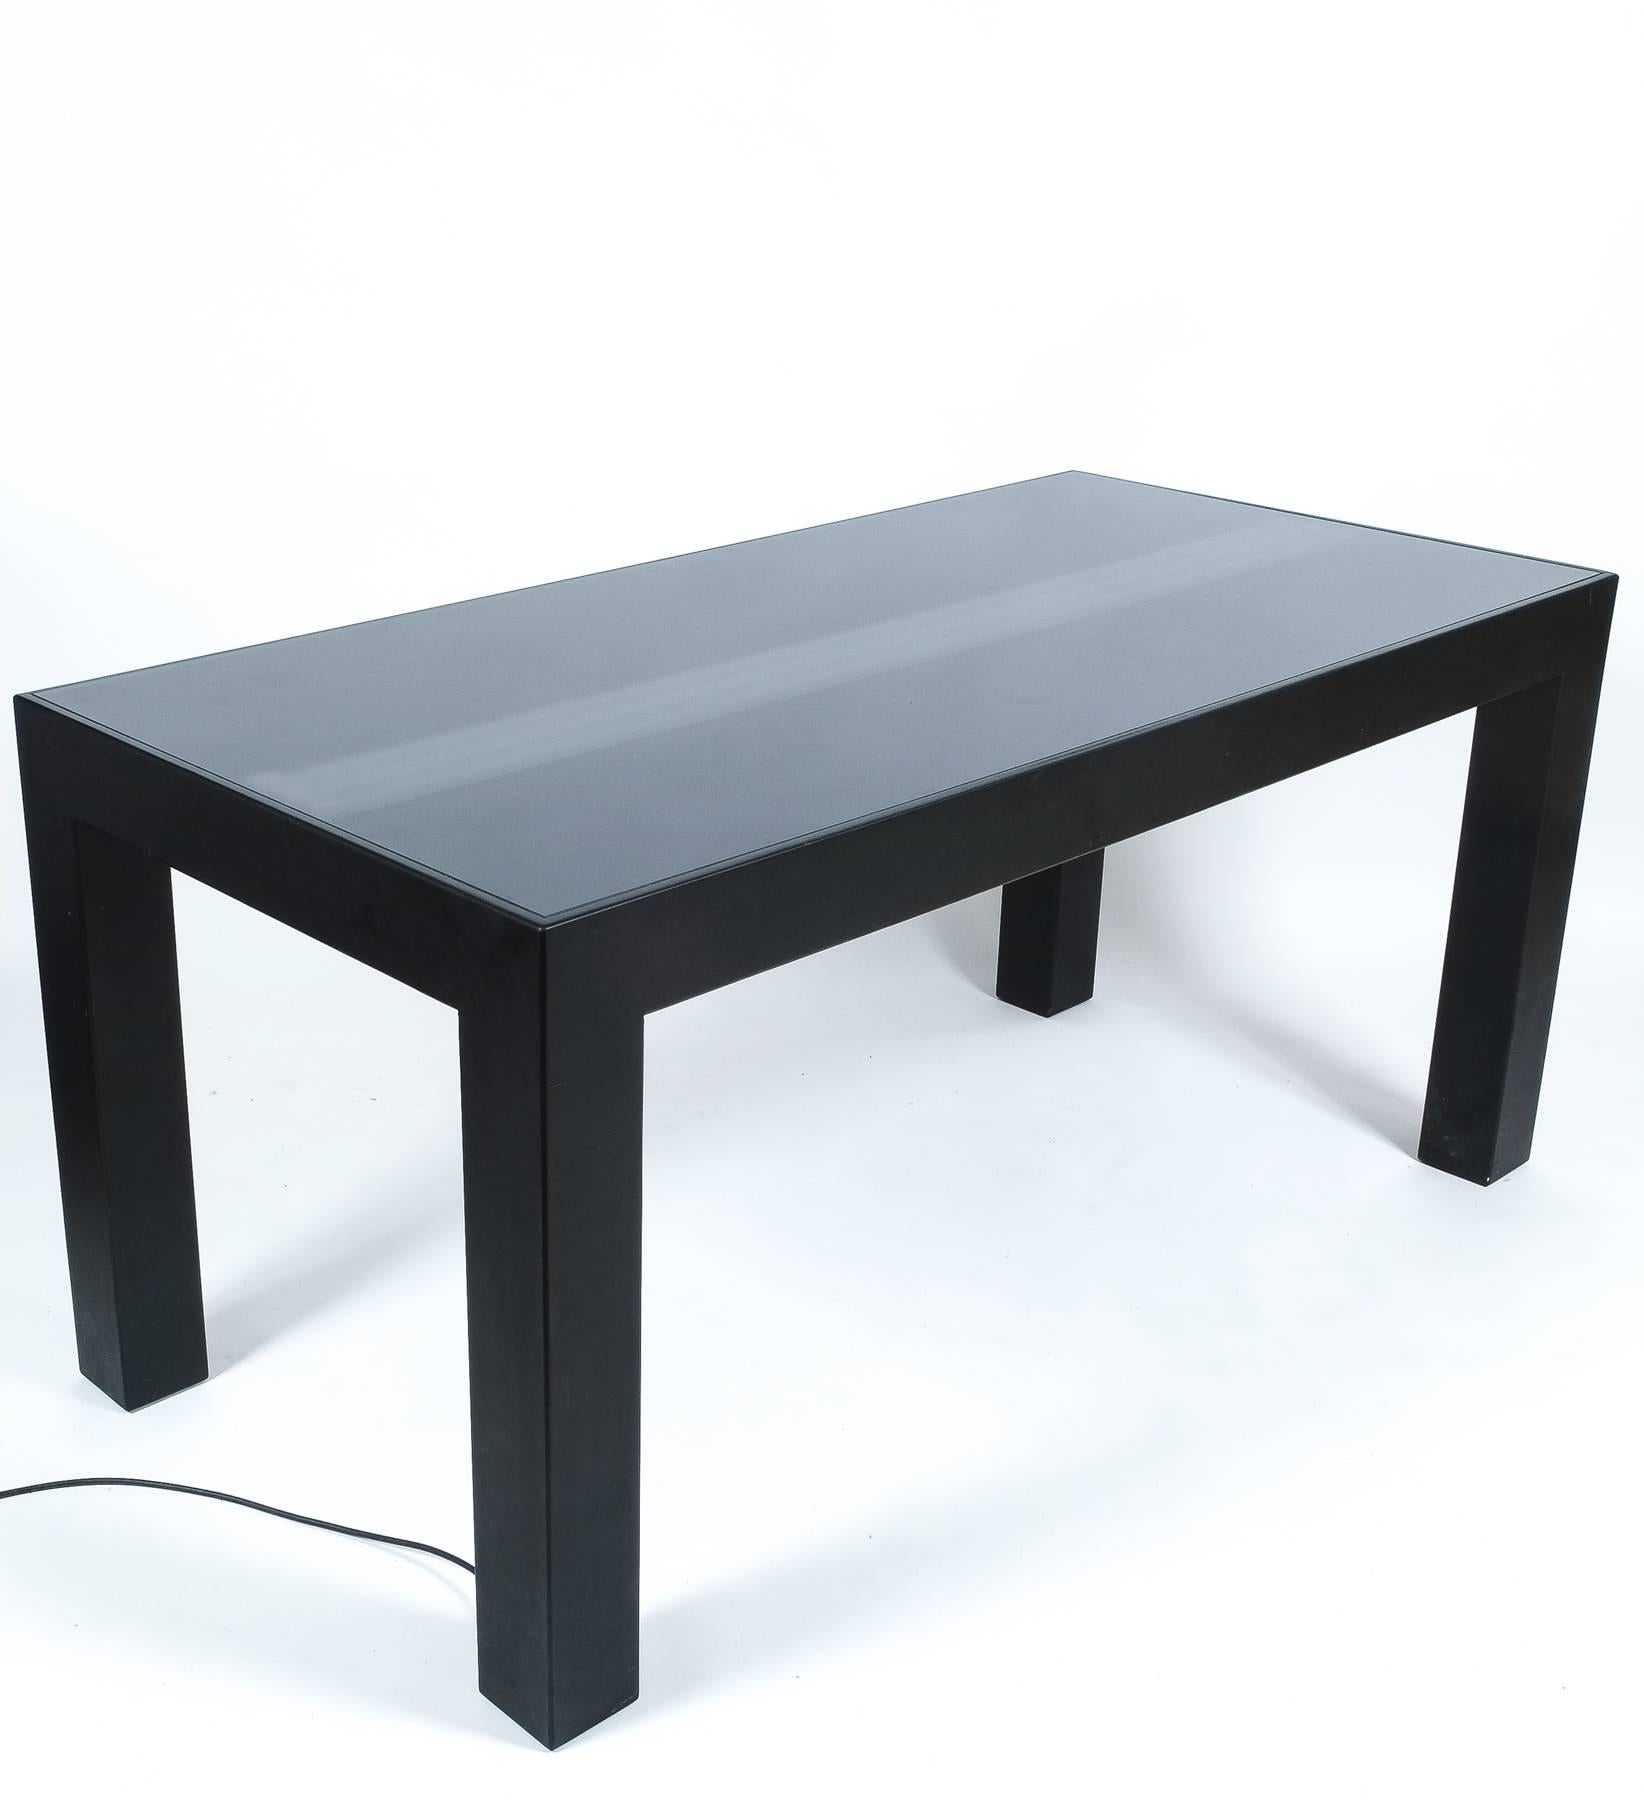 Steel Johanna Grawunder Illuminated Dining Table by  for Post-Design, 2001 For Sale